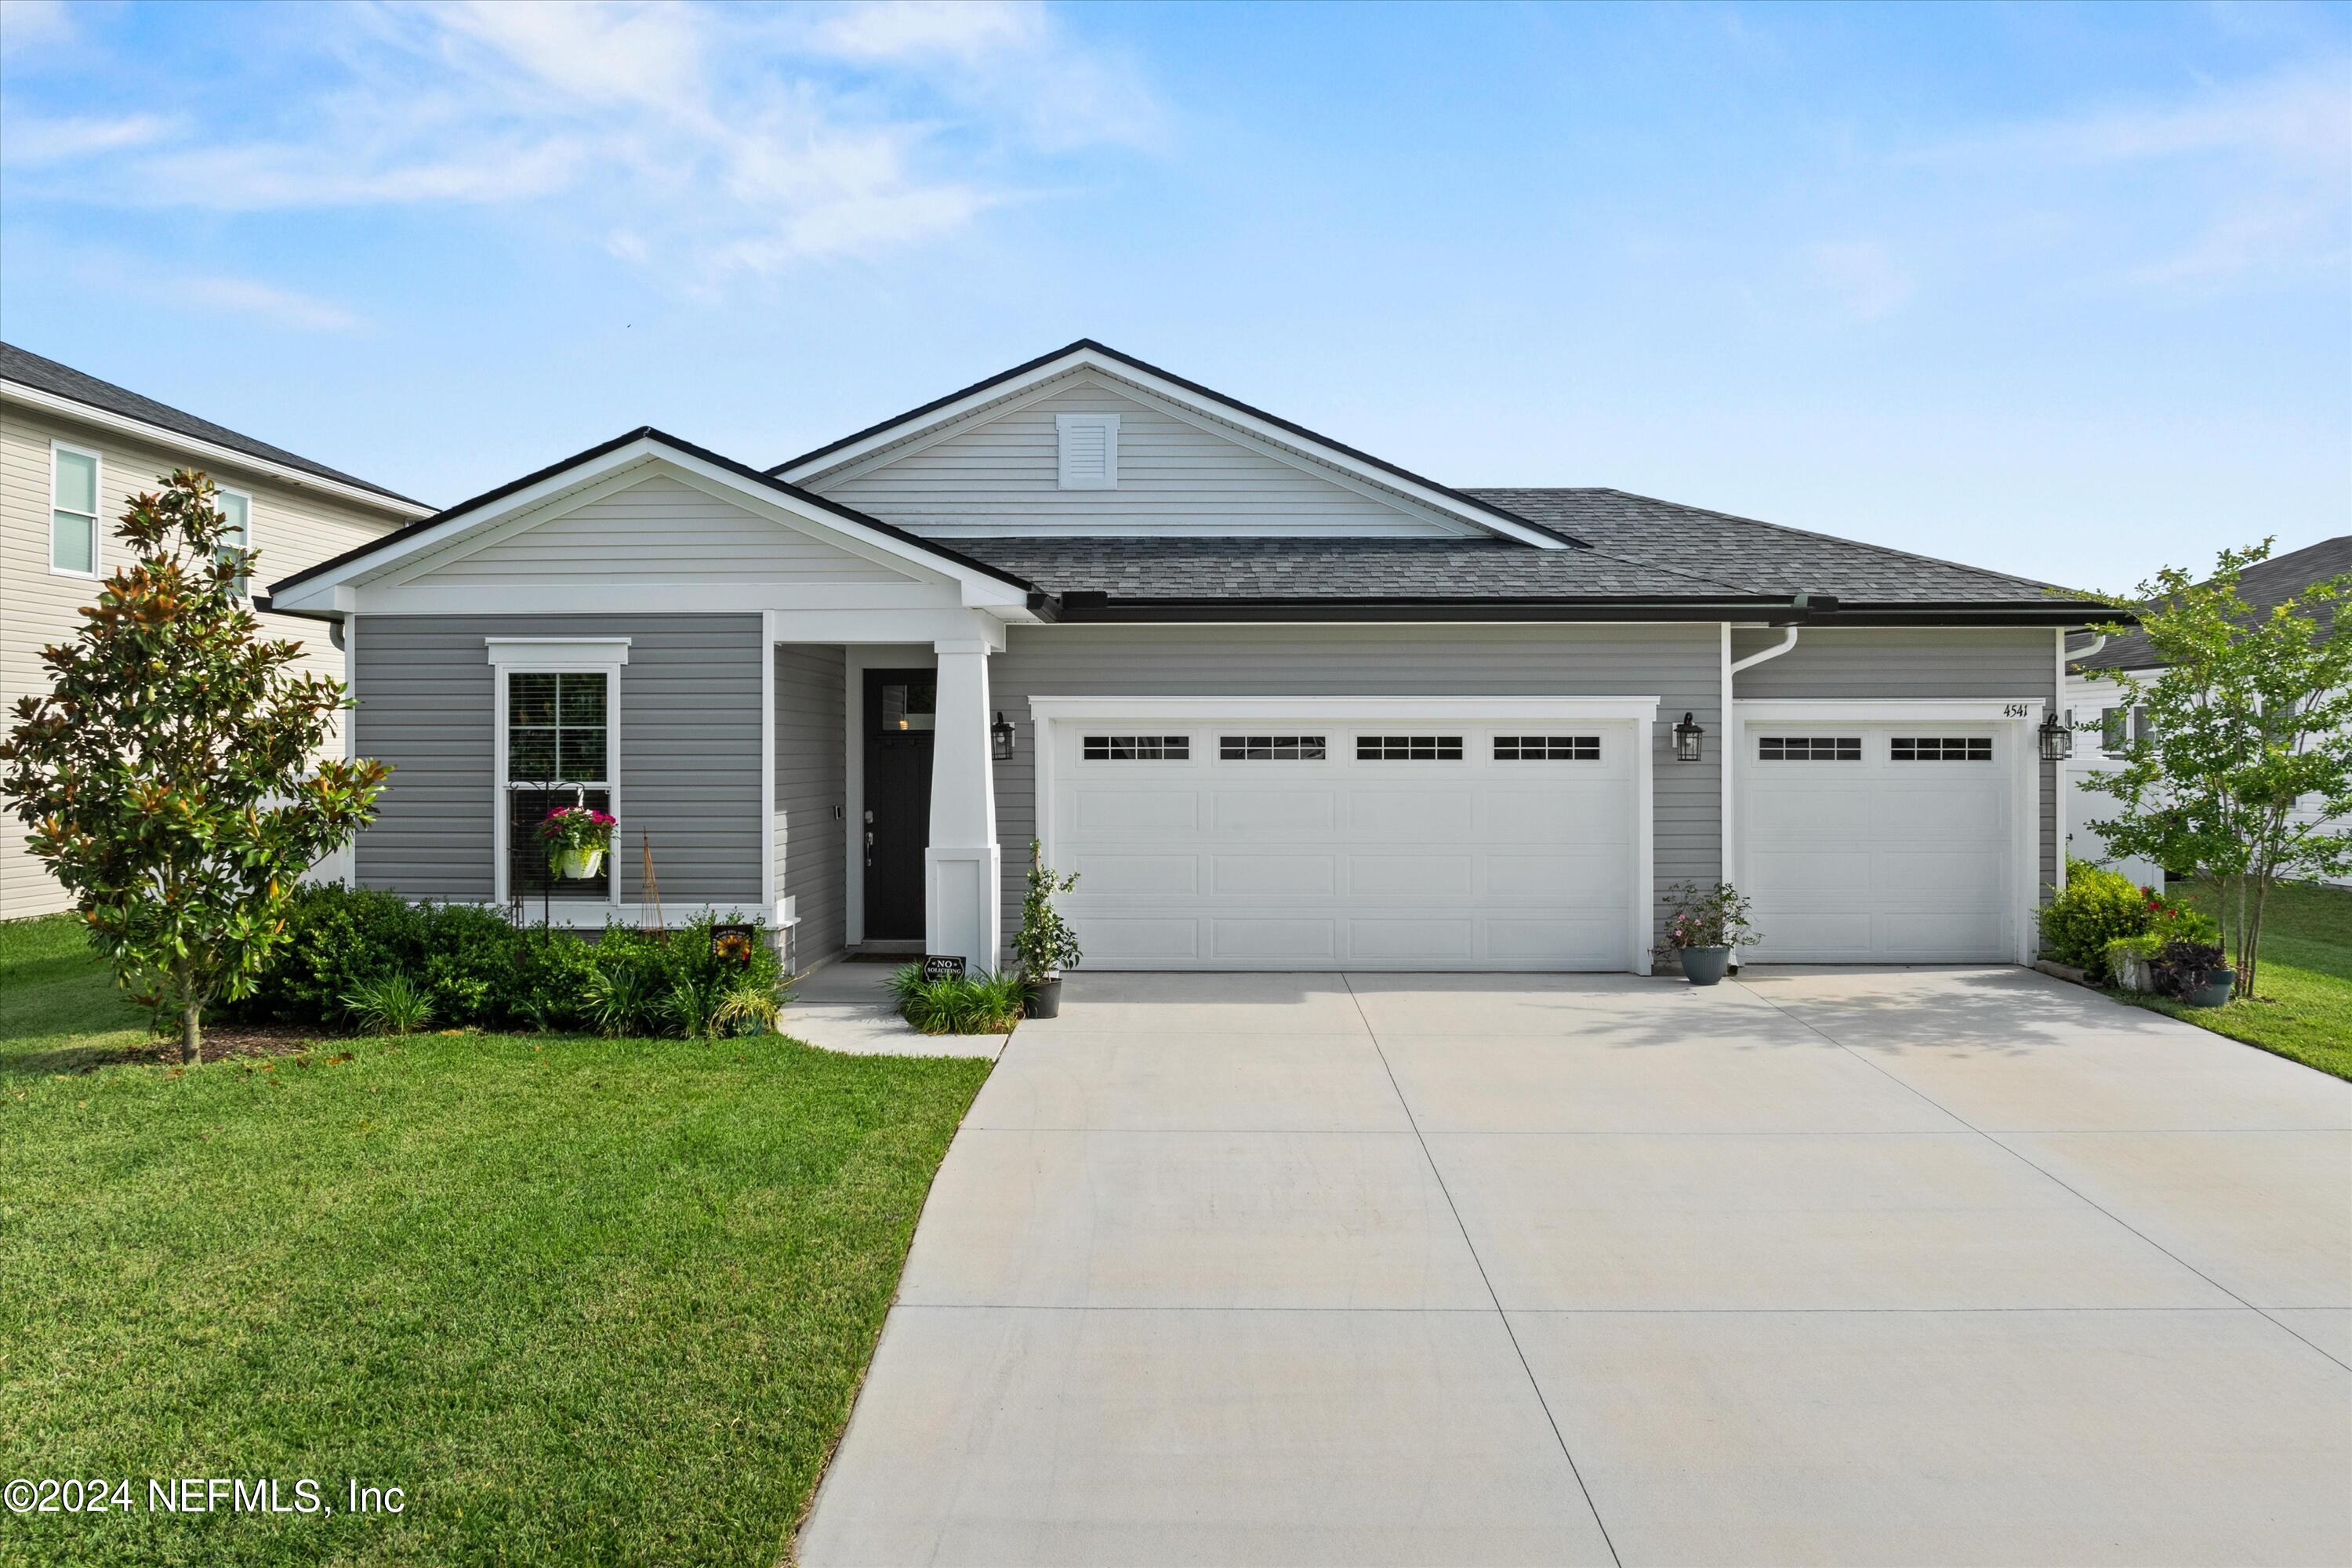 Middleburg, FL home for sale located at 4541 Pine Ridge Parkway, Middleburg, FL 32068